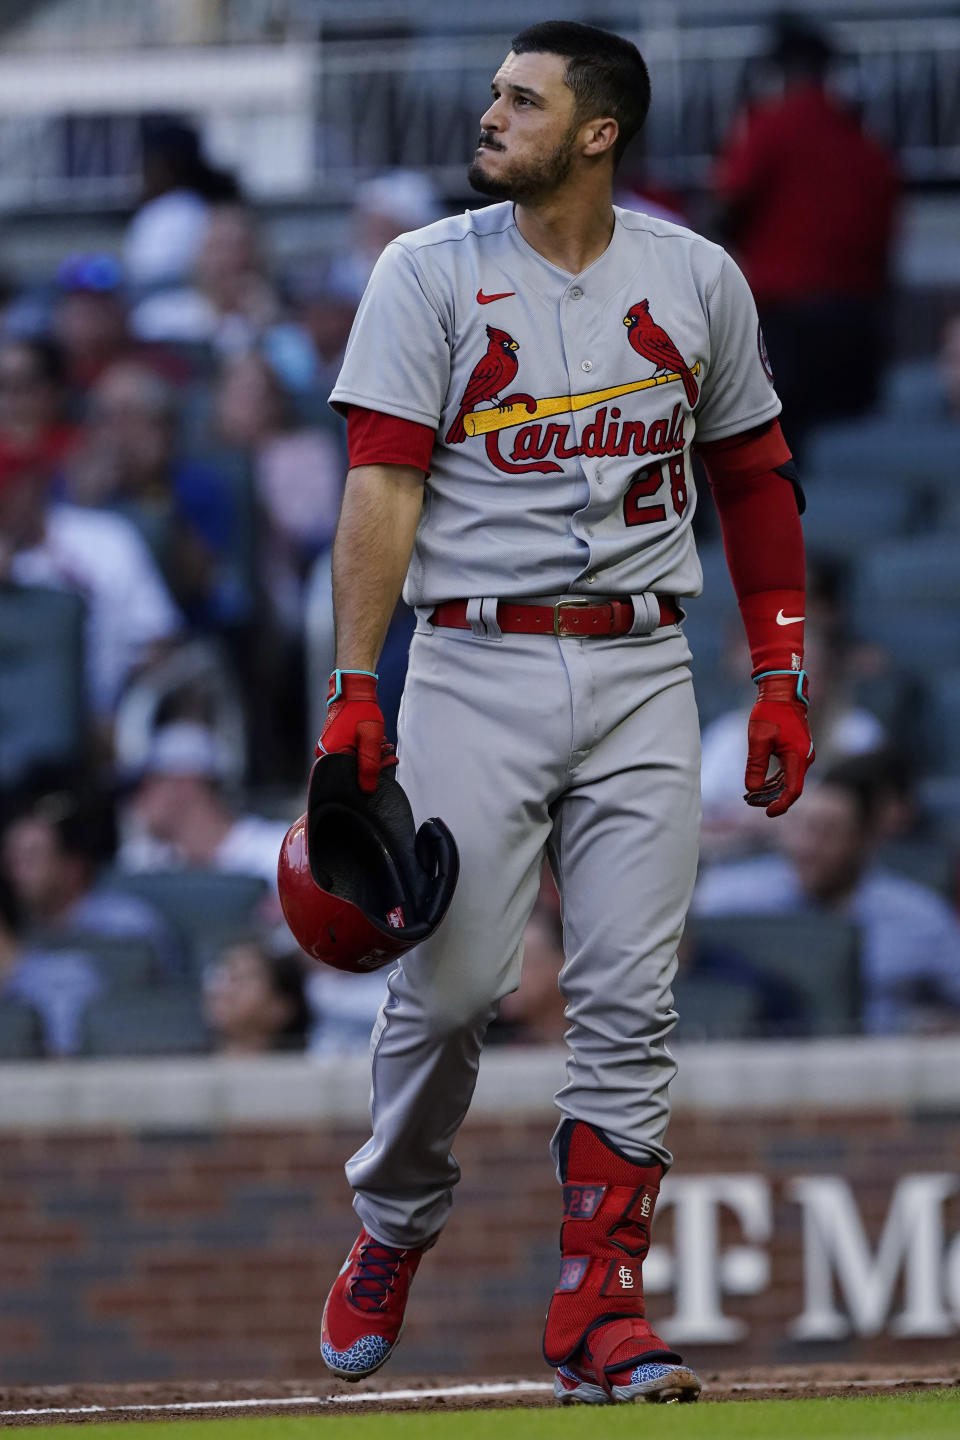 St. Louis Cardinals' Nolan Arenado walks back to the dugout after striking out to end the Cardinals' half of the fourth inning of a baseball game against the Atlanta Braves on Thursday, June 17, 2021, in Atlanta. (AP Photo/John Bazemore)